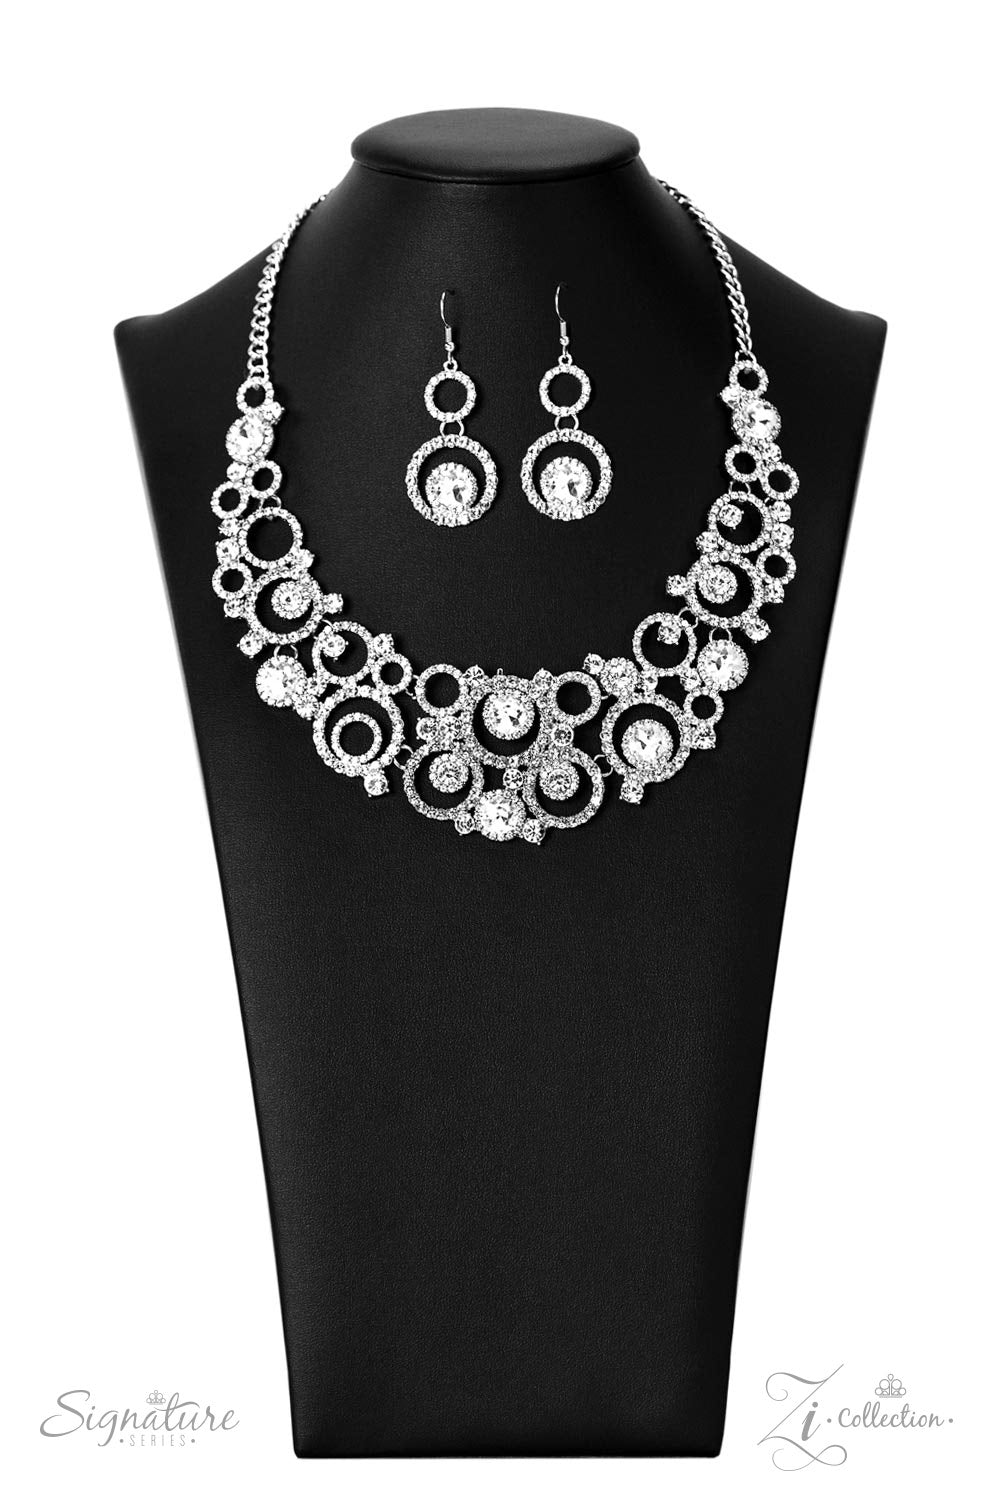 22 pieces of Paparazzi Jewelry All new!